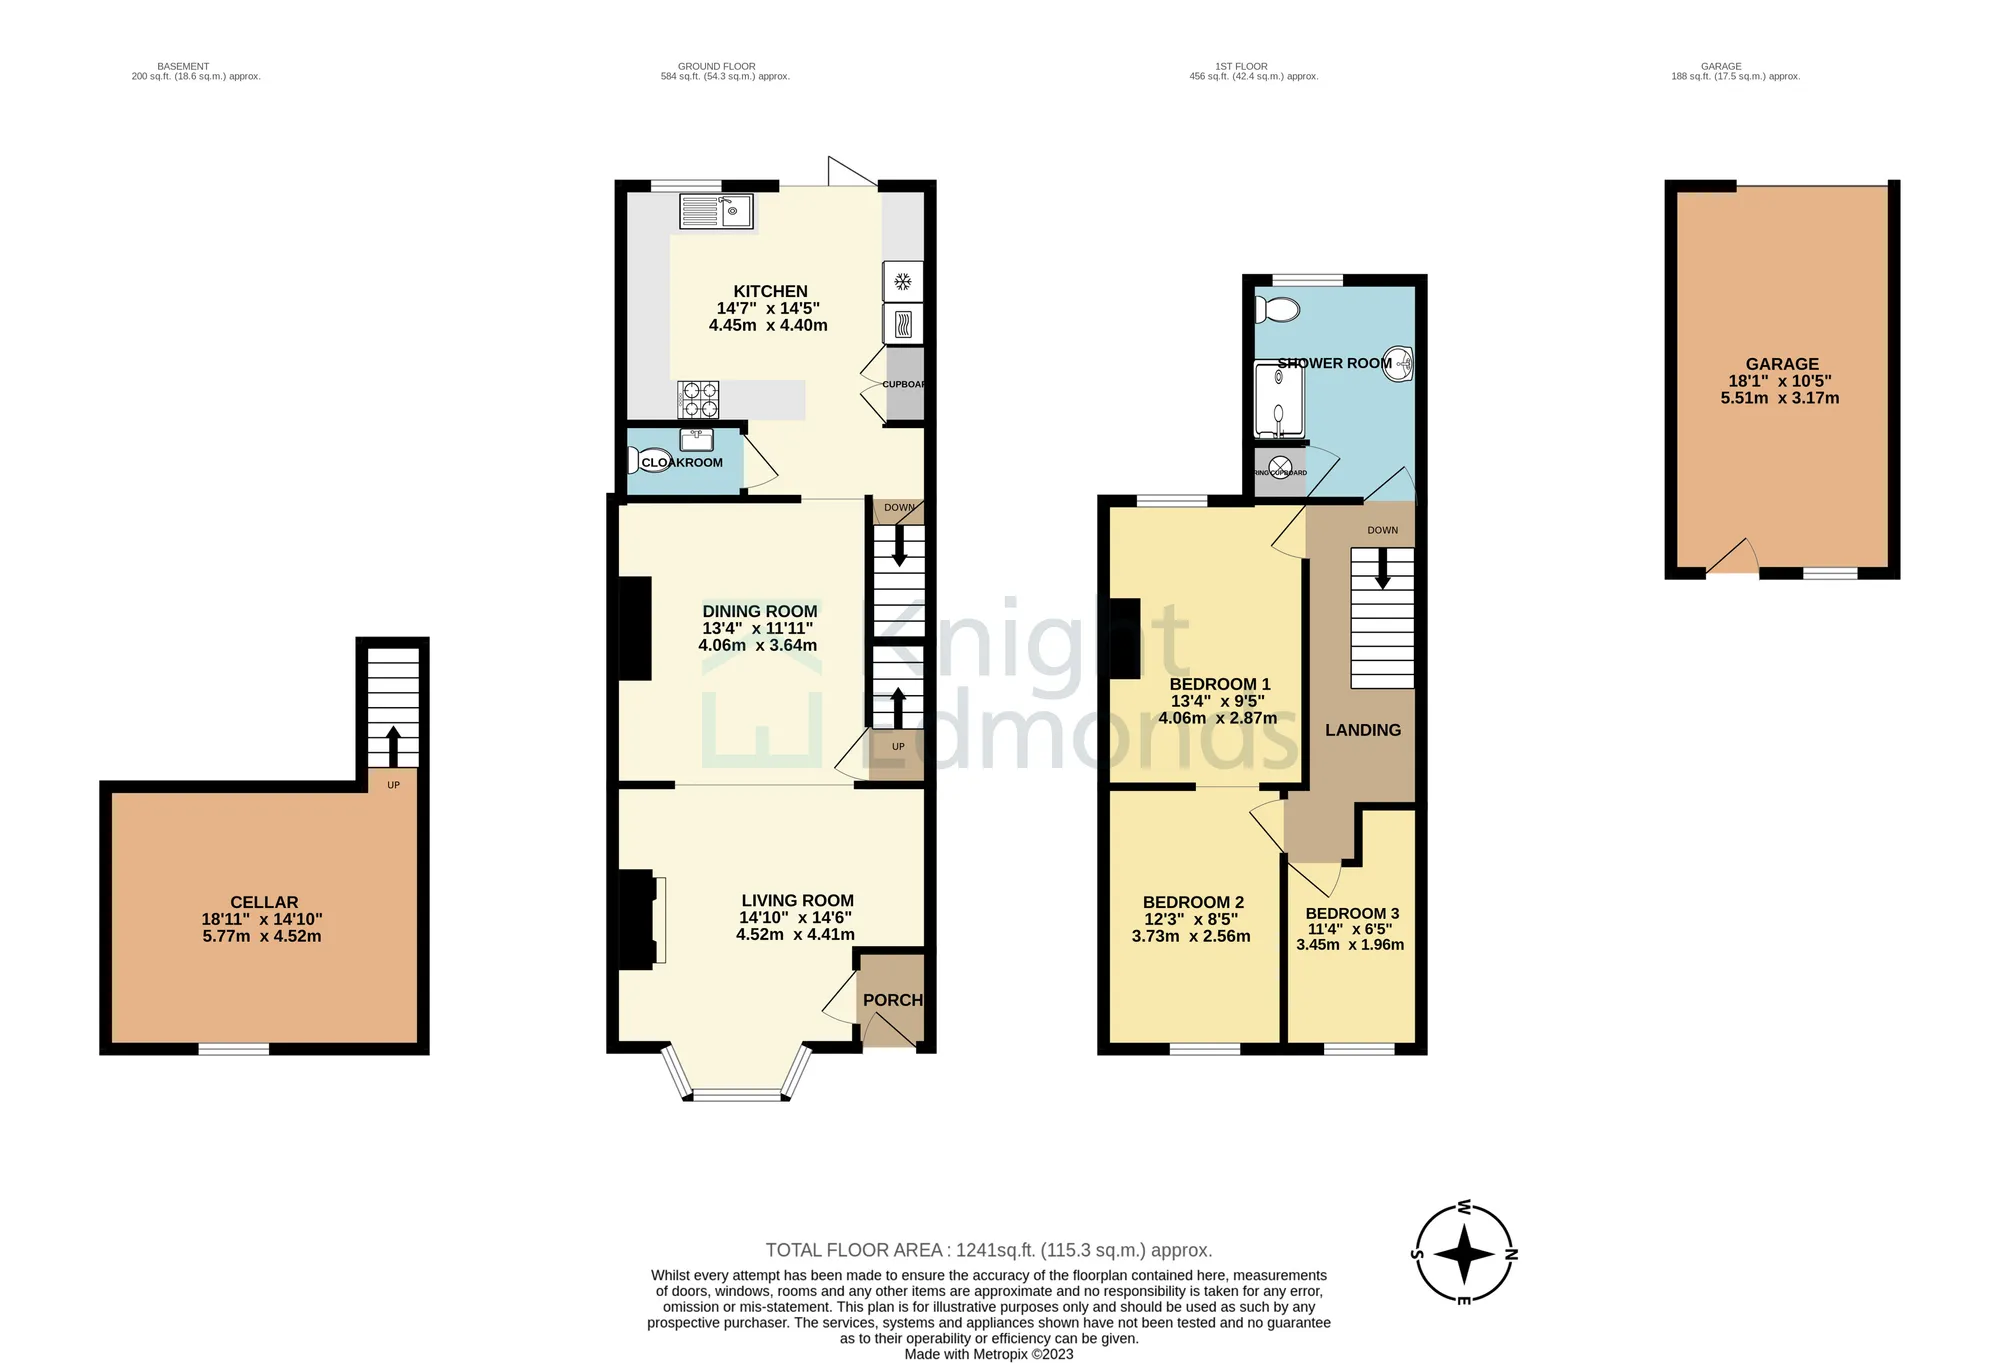 3 bed mid-terraced house for sale in Victoria Street, Maidstone - Property floorplan